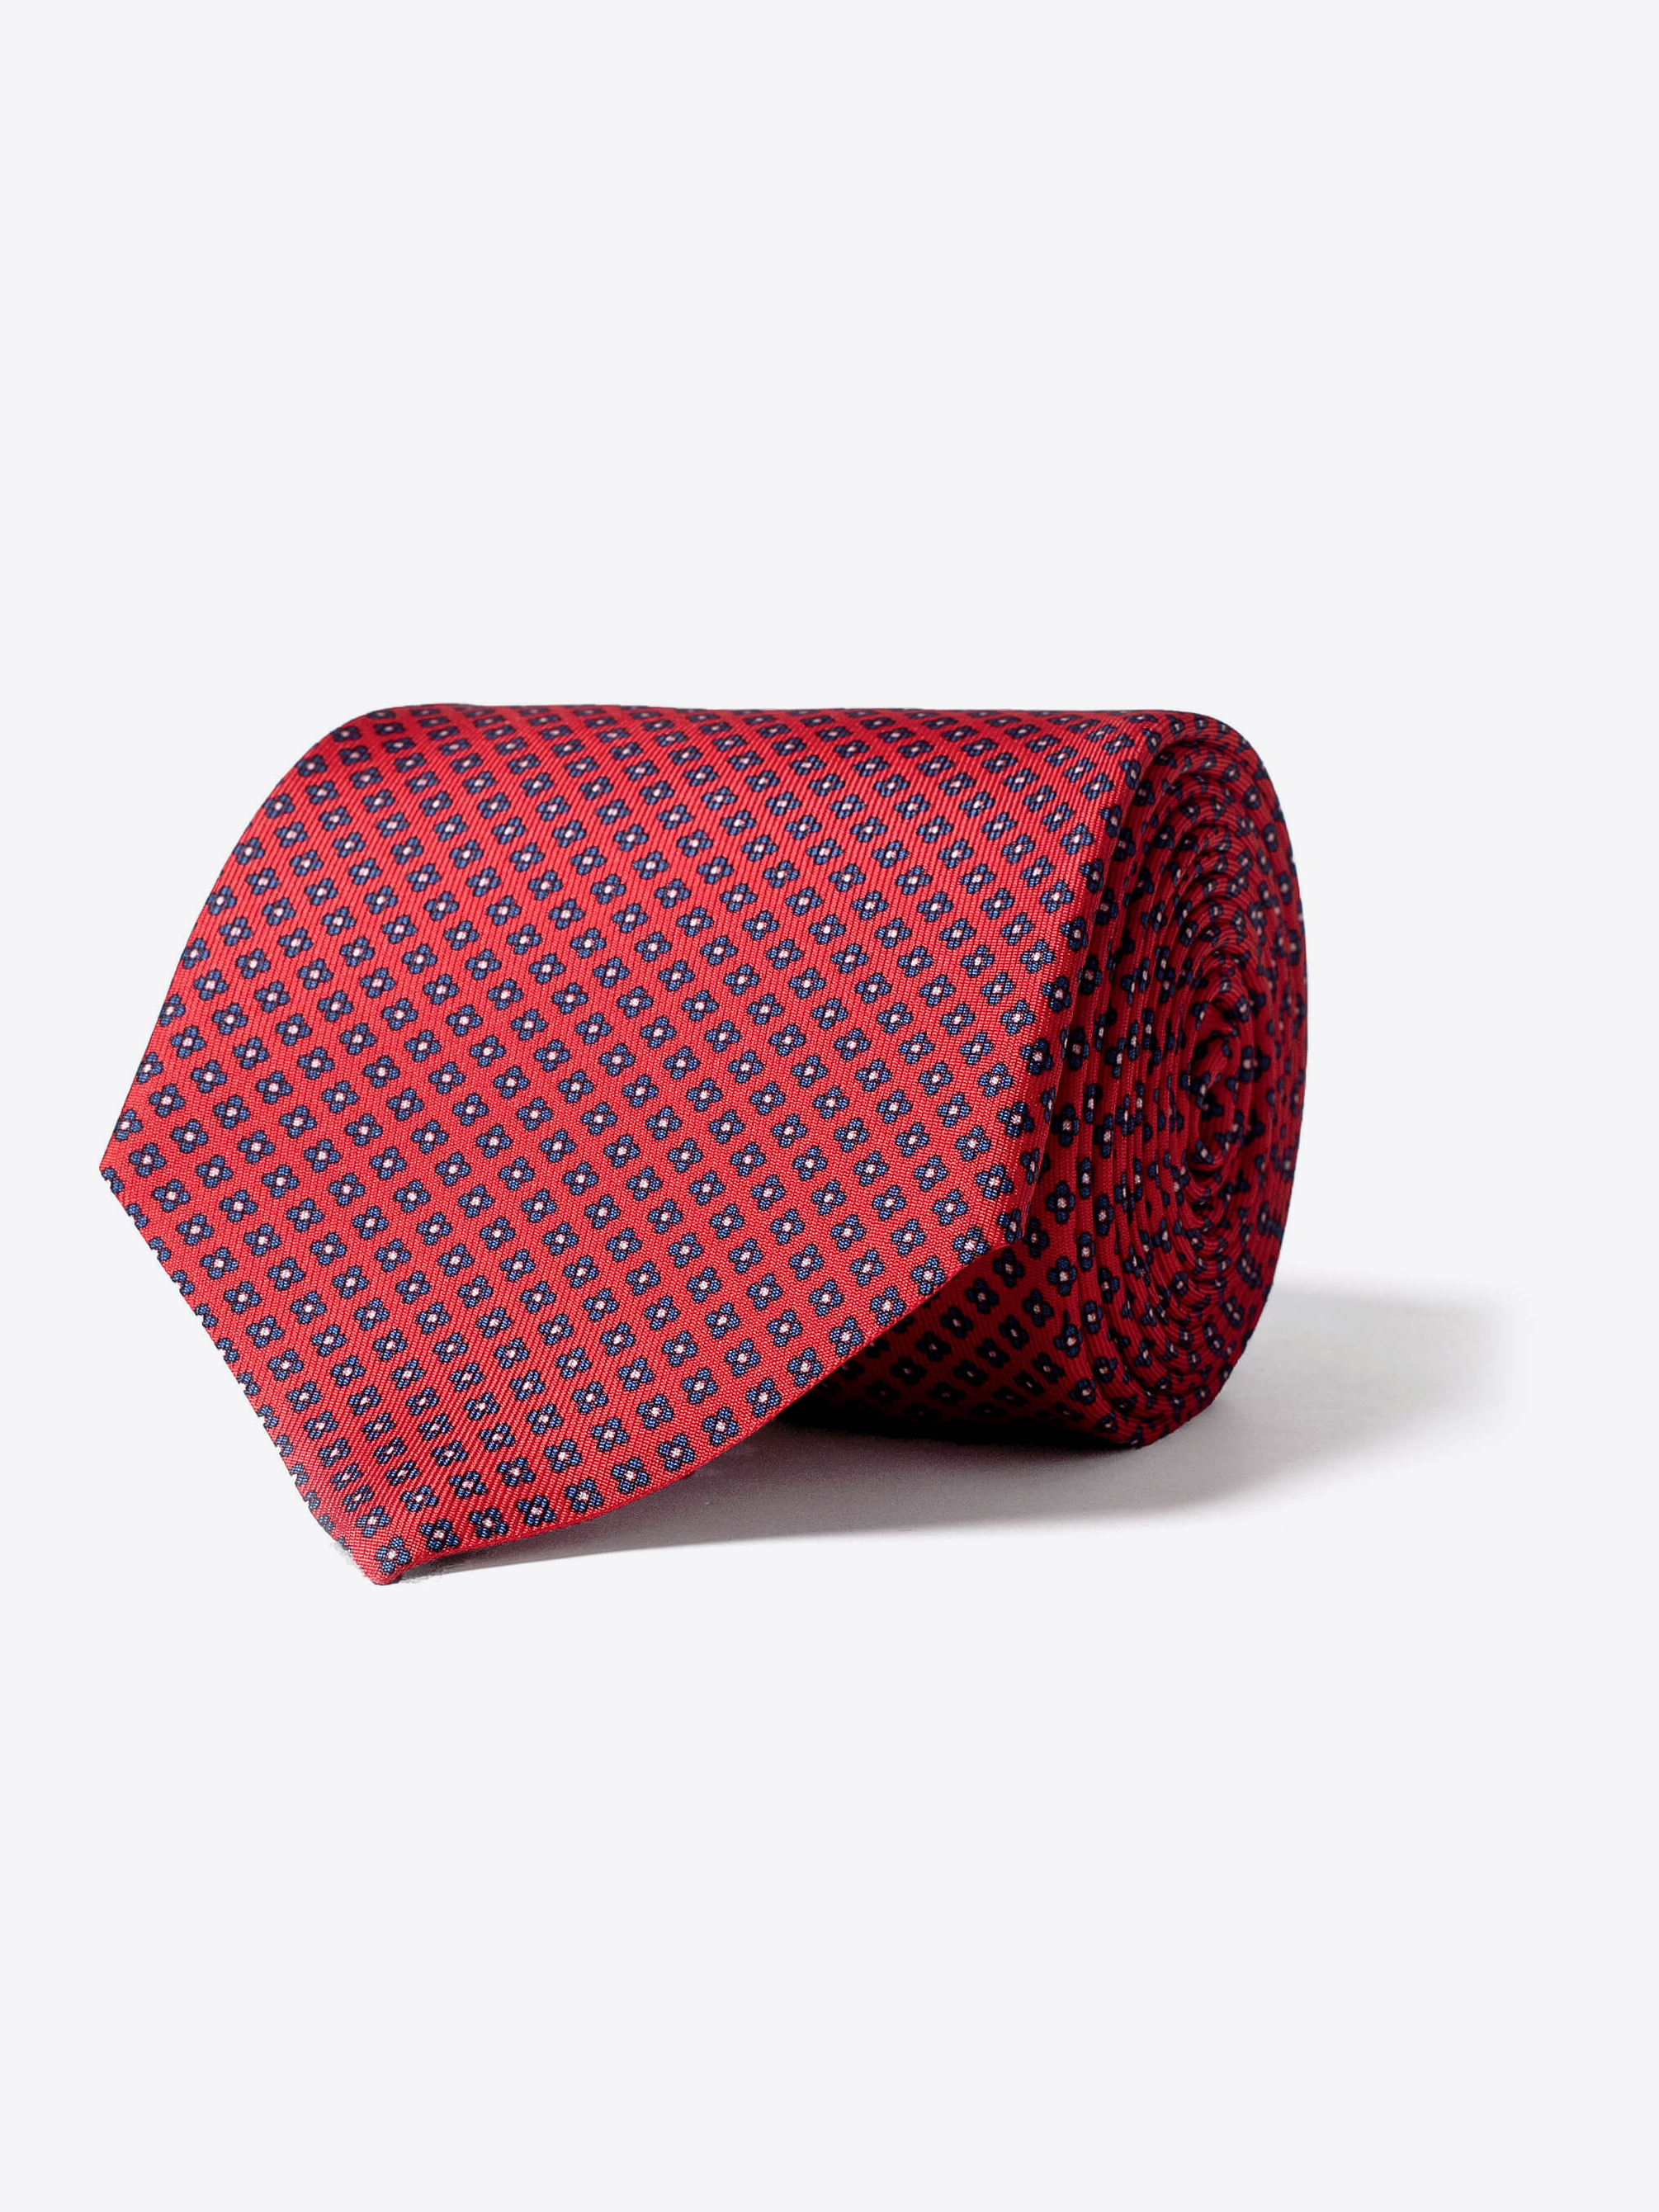 Zoom Image of Red and Navy Small Foulard Silk Tie